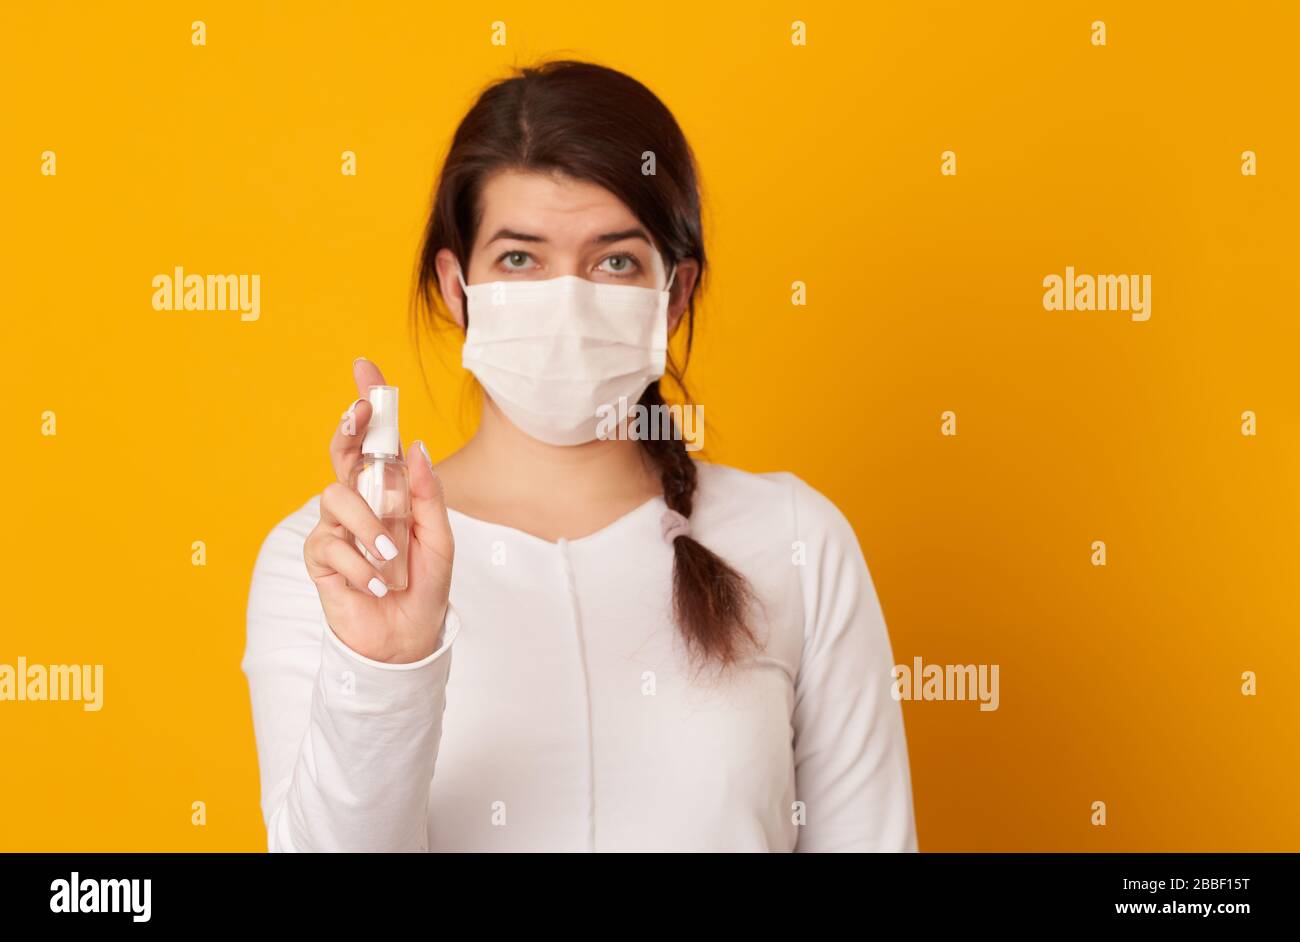 Woman holds antiseptic in her hands. Concept of hygiene, protect of virus. Covid-19 Corona Prevention Measures. Stock Photo